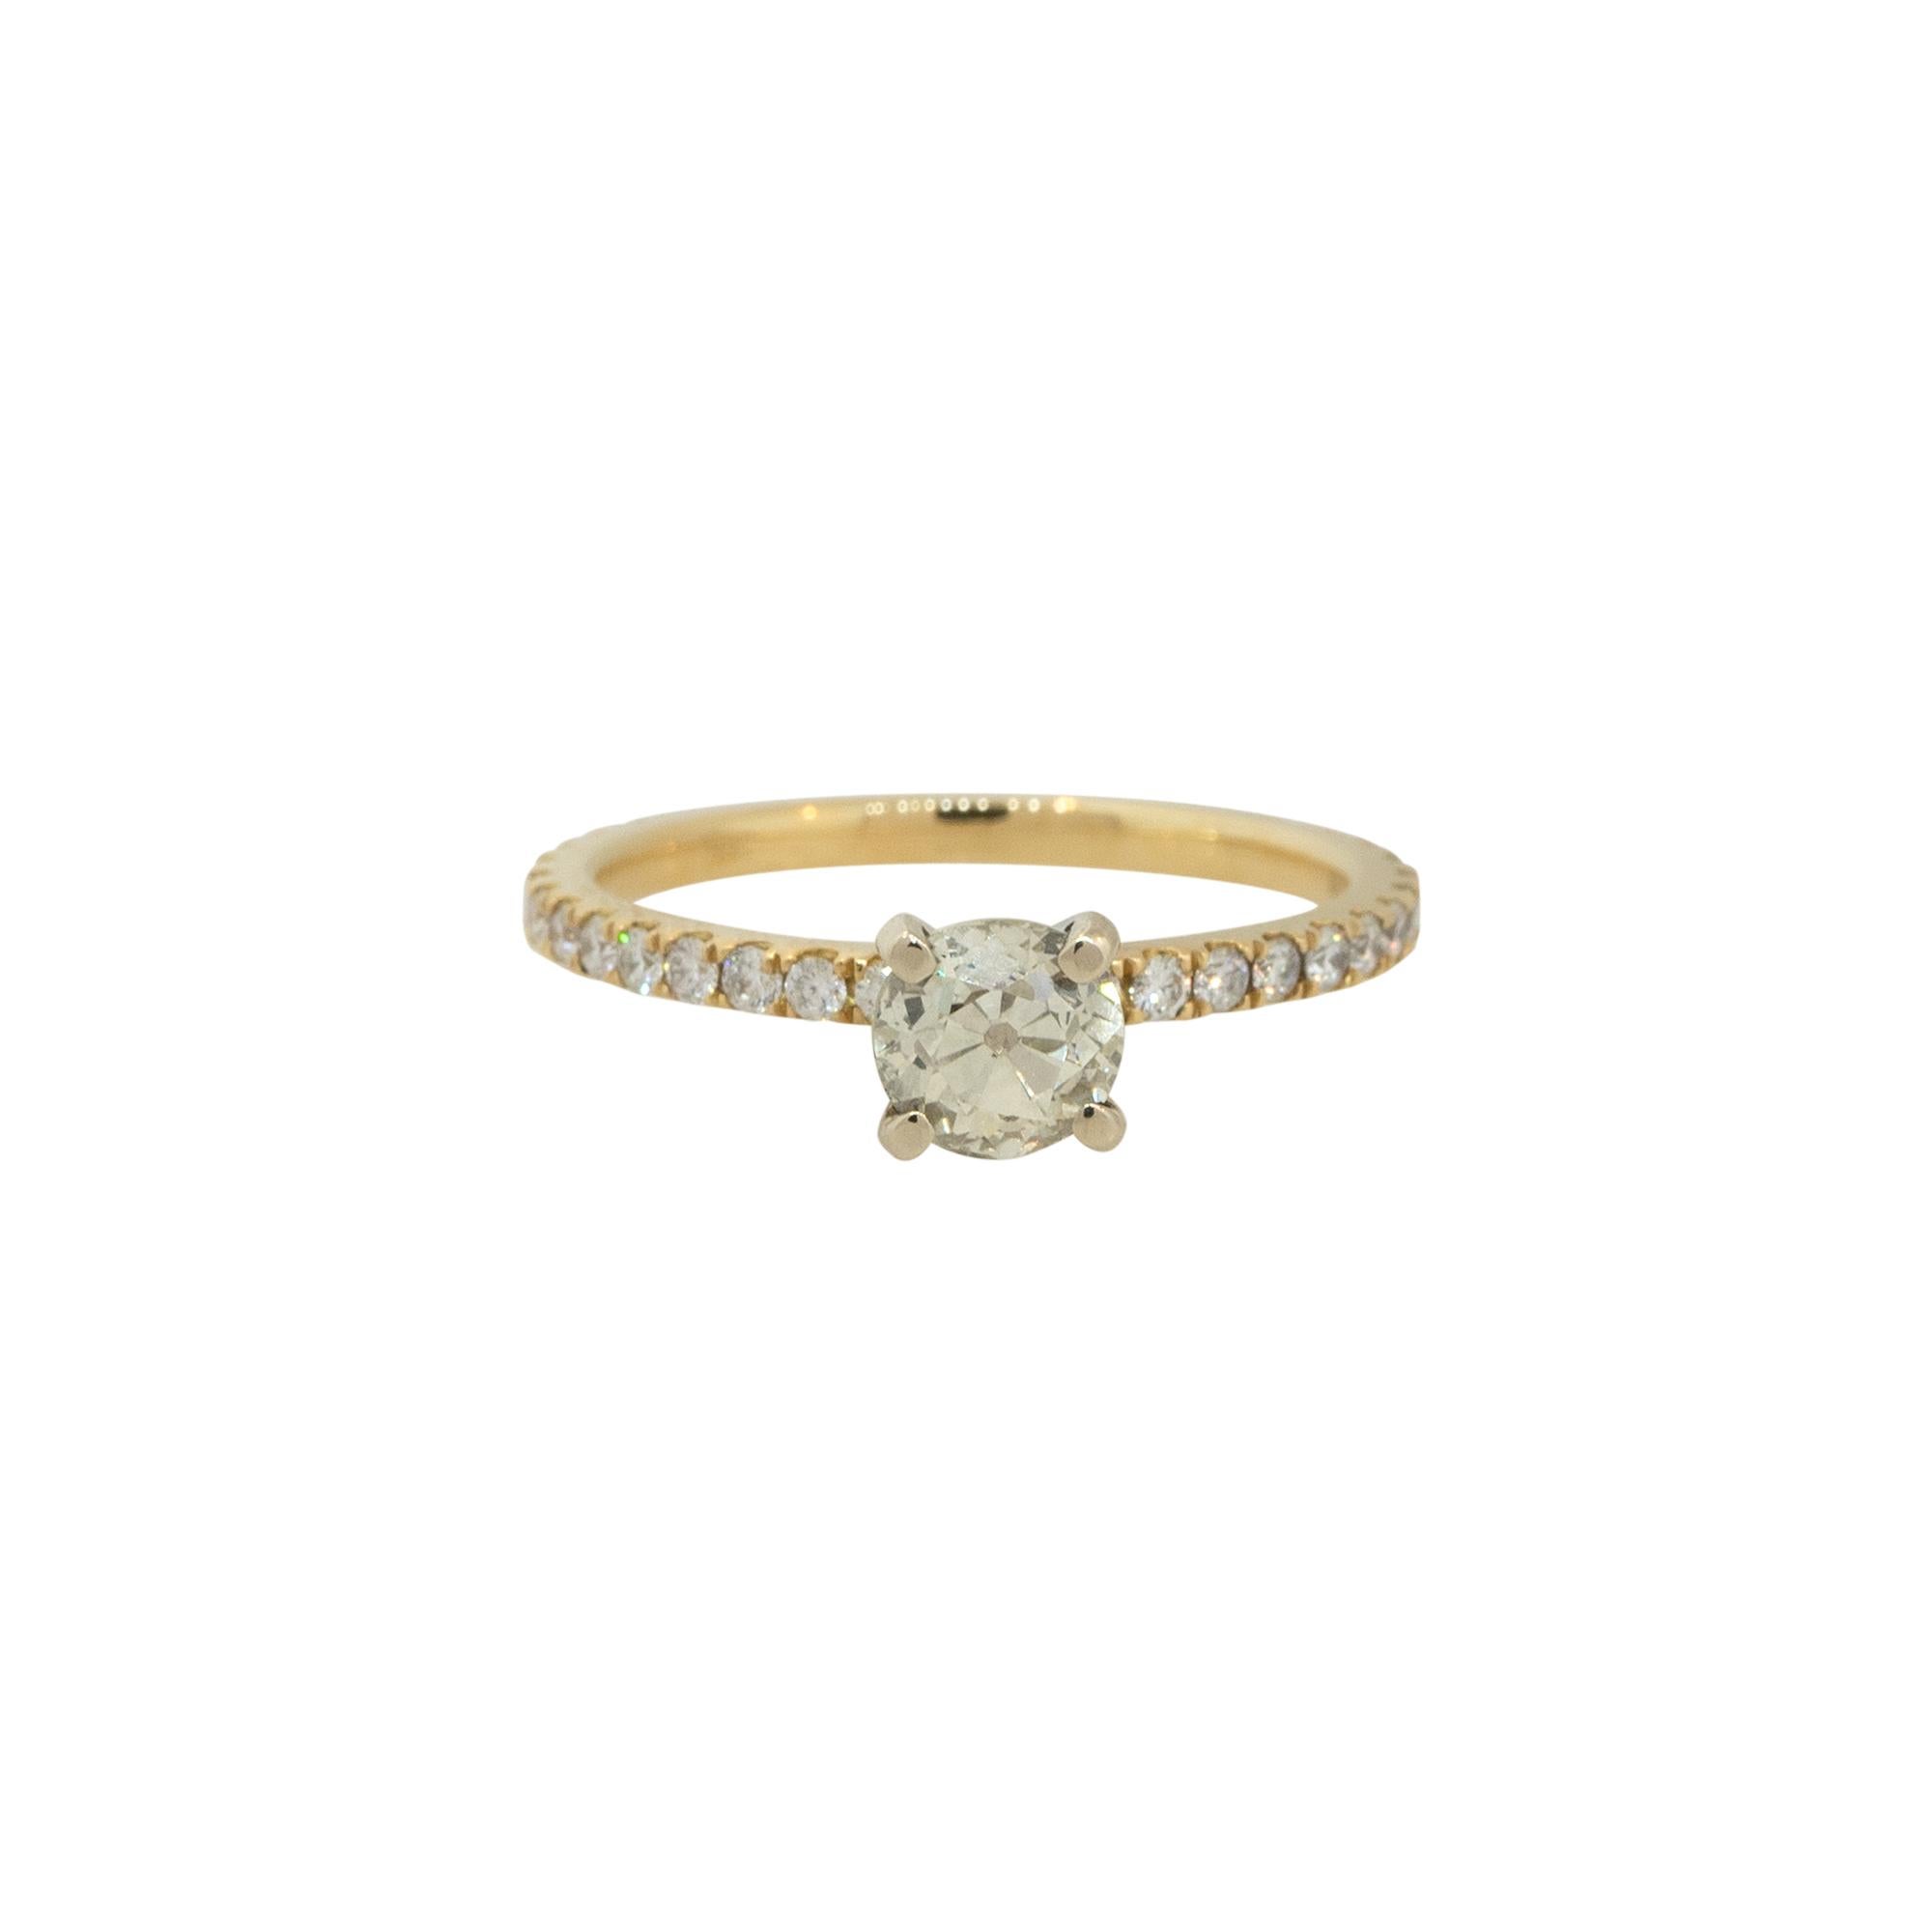 18k Yellow Gold 1.29ctw Old Cut Diamond Engagement Ring

Raymond Lee Jewelers in Boca Raton -- South Florida’s destination for diamonds, fine jewelry, antique jewelry, estate pieces, and vintage jewels.

Style: Women's 4 Prong Engagement